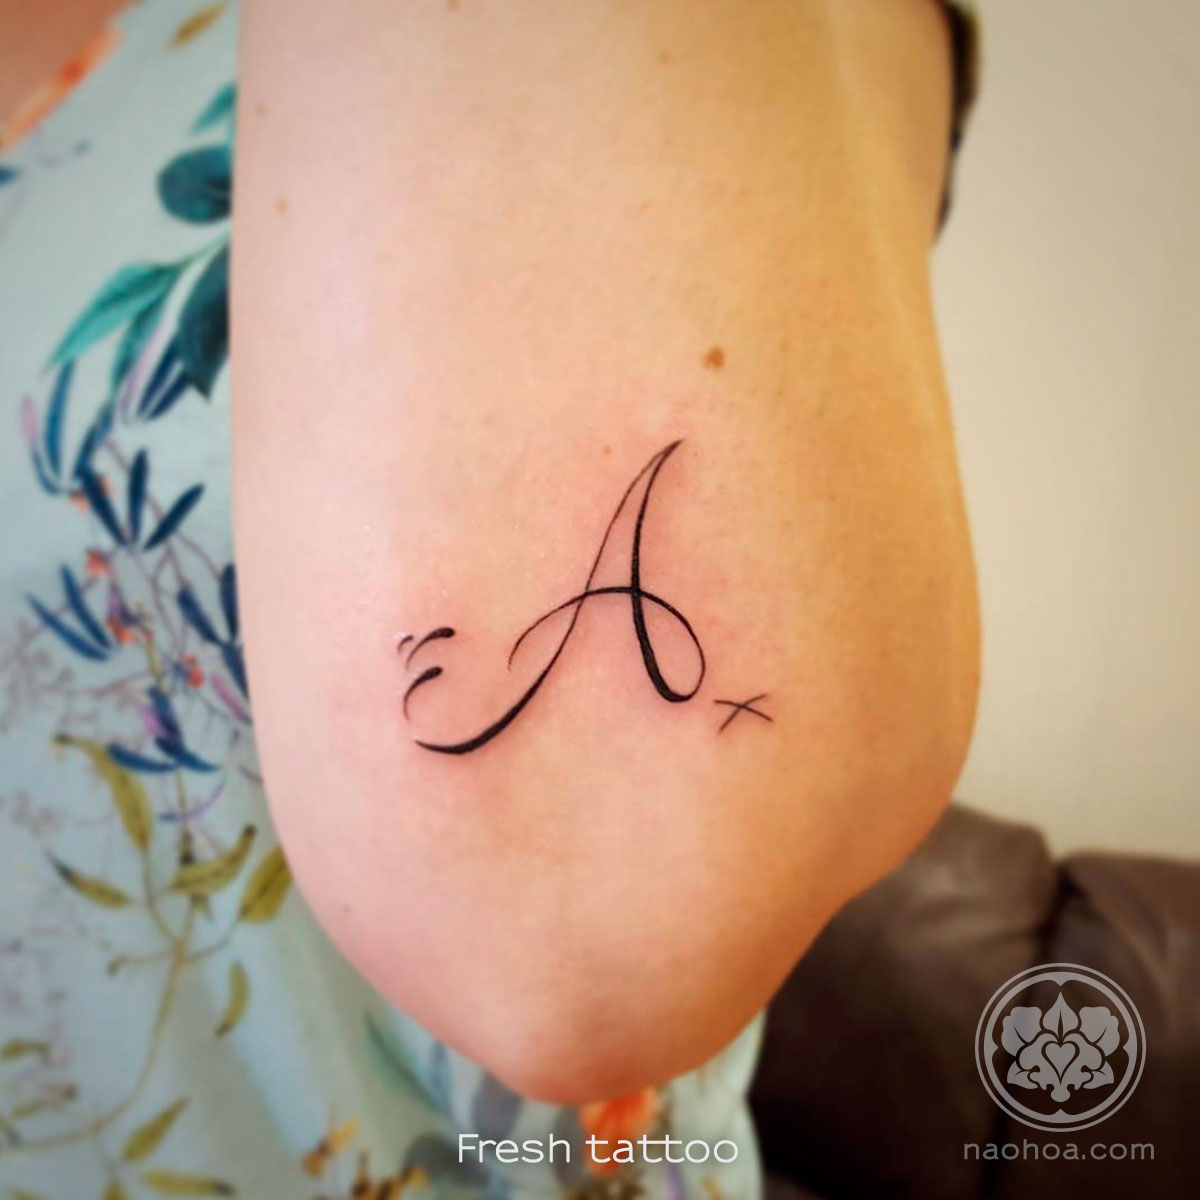 Tattoo of the letter 'A' for the first name of this client's child. Designed and tattooed by Naomi Hoang at NAOHOA Luxury Bespoke Tattoos, Cardiff (Wales, UK).